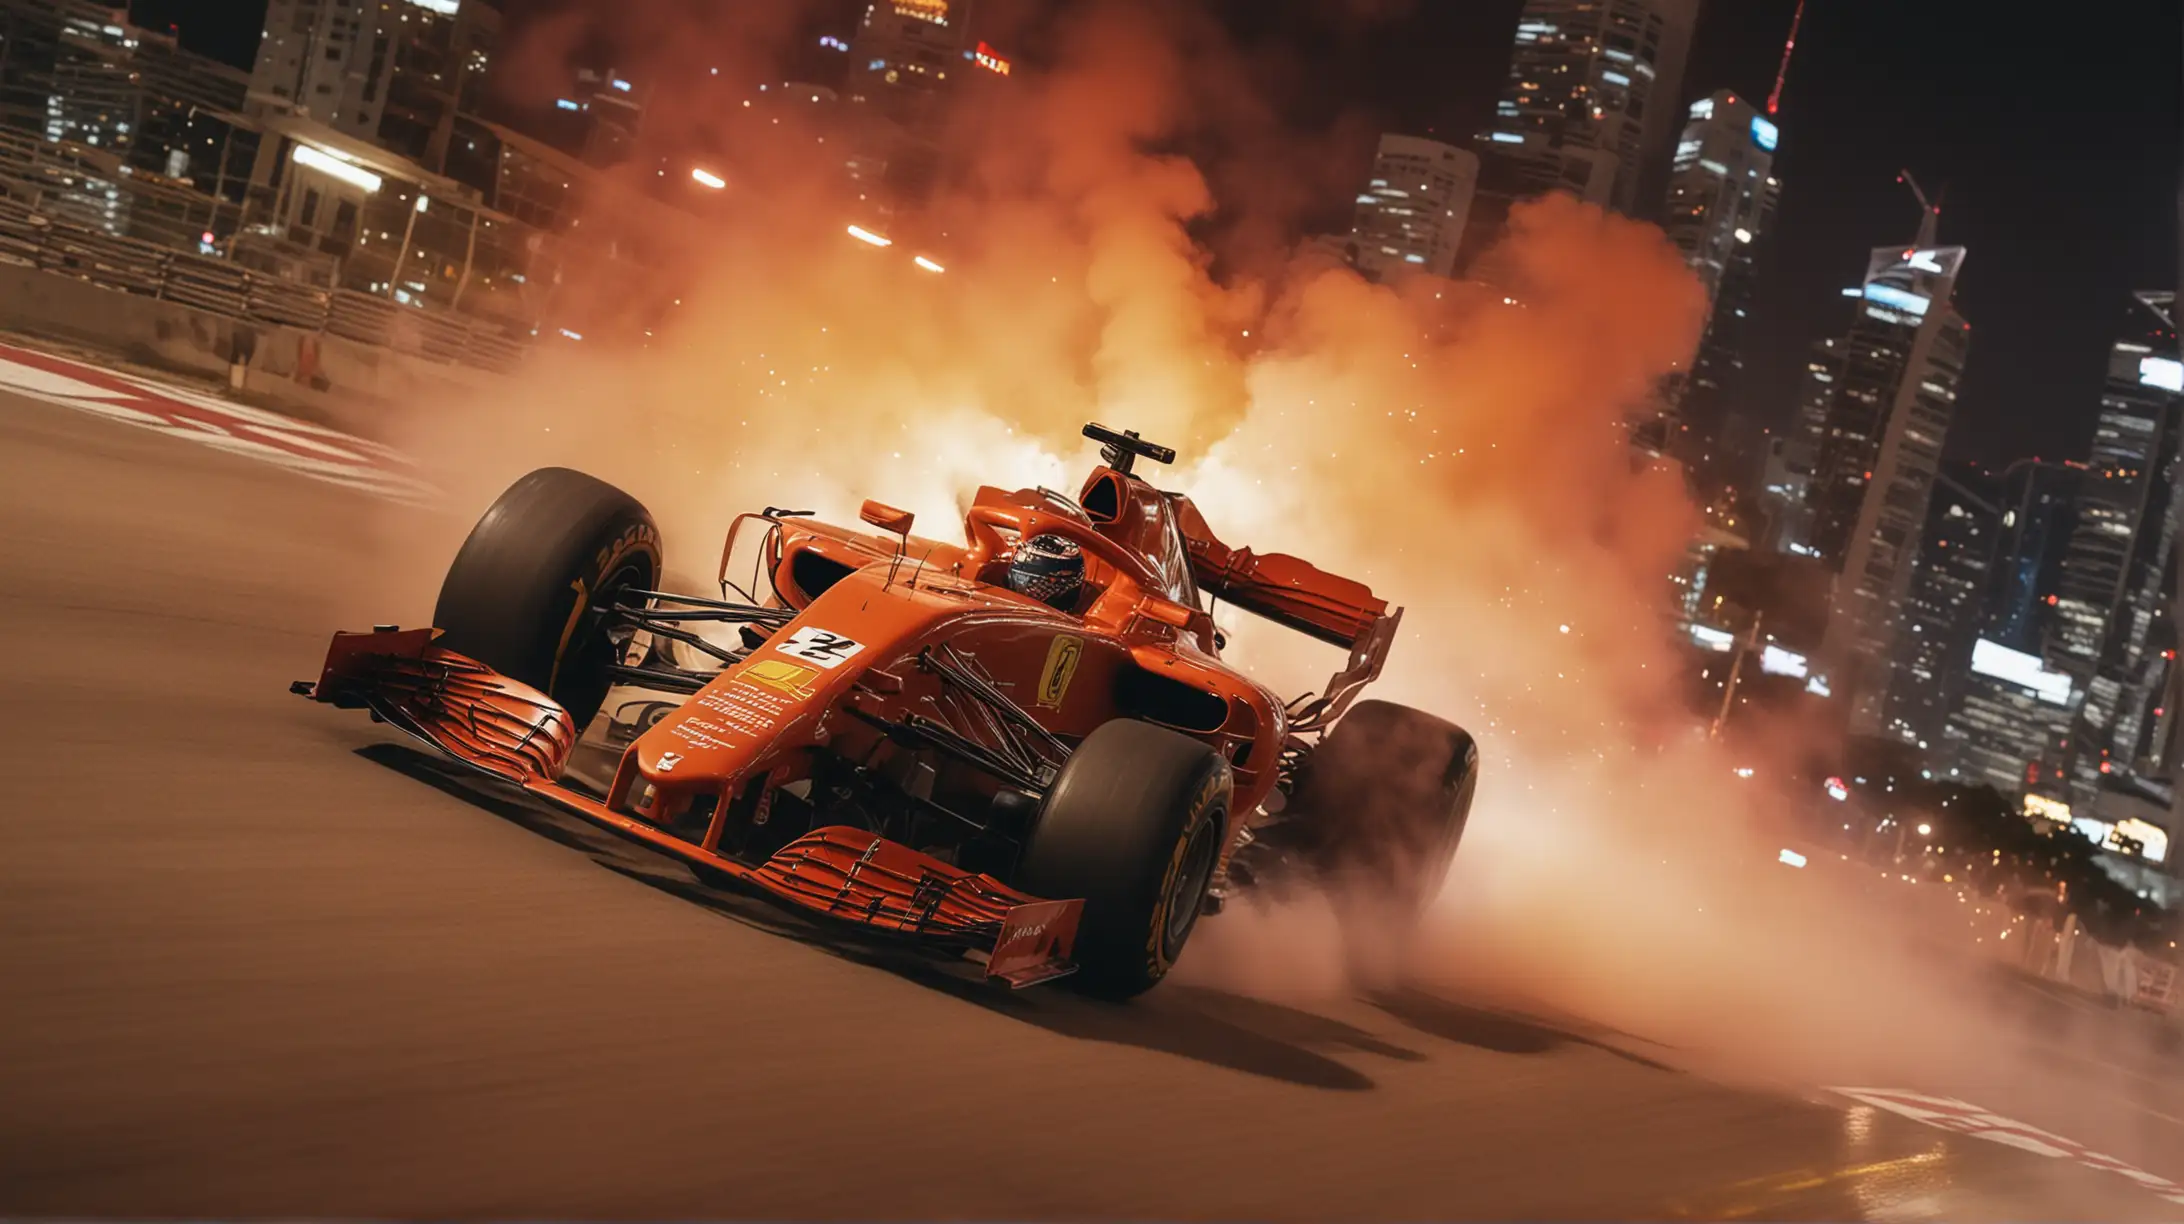 Nighttime Red Ferrari F1 Race in Singapore with Cinematic Warmth